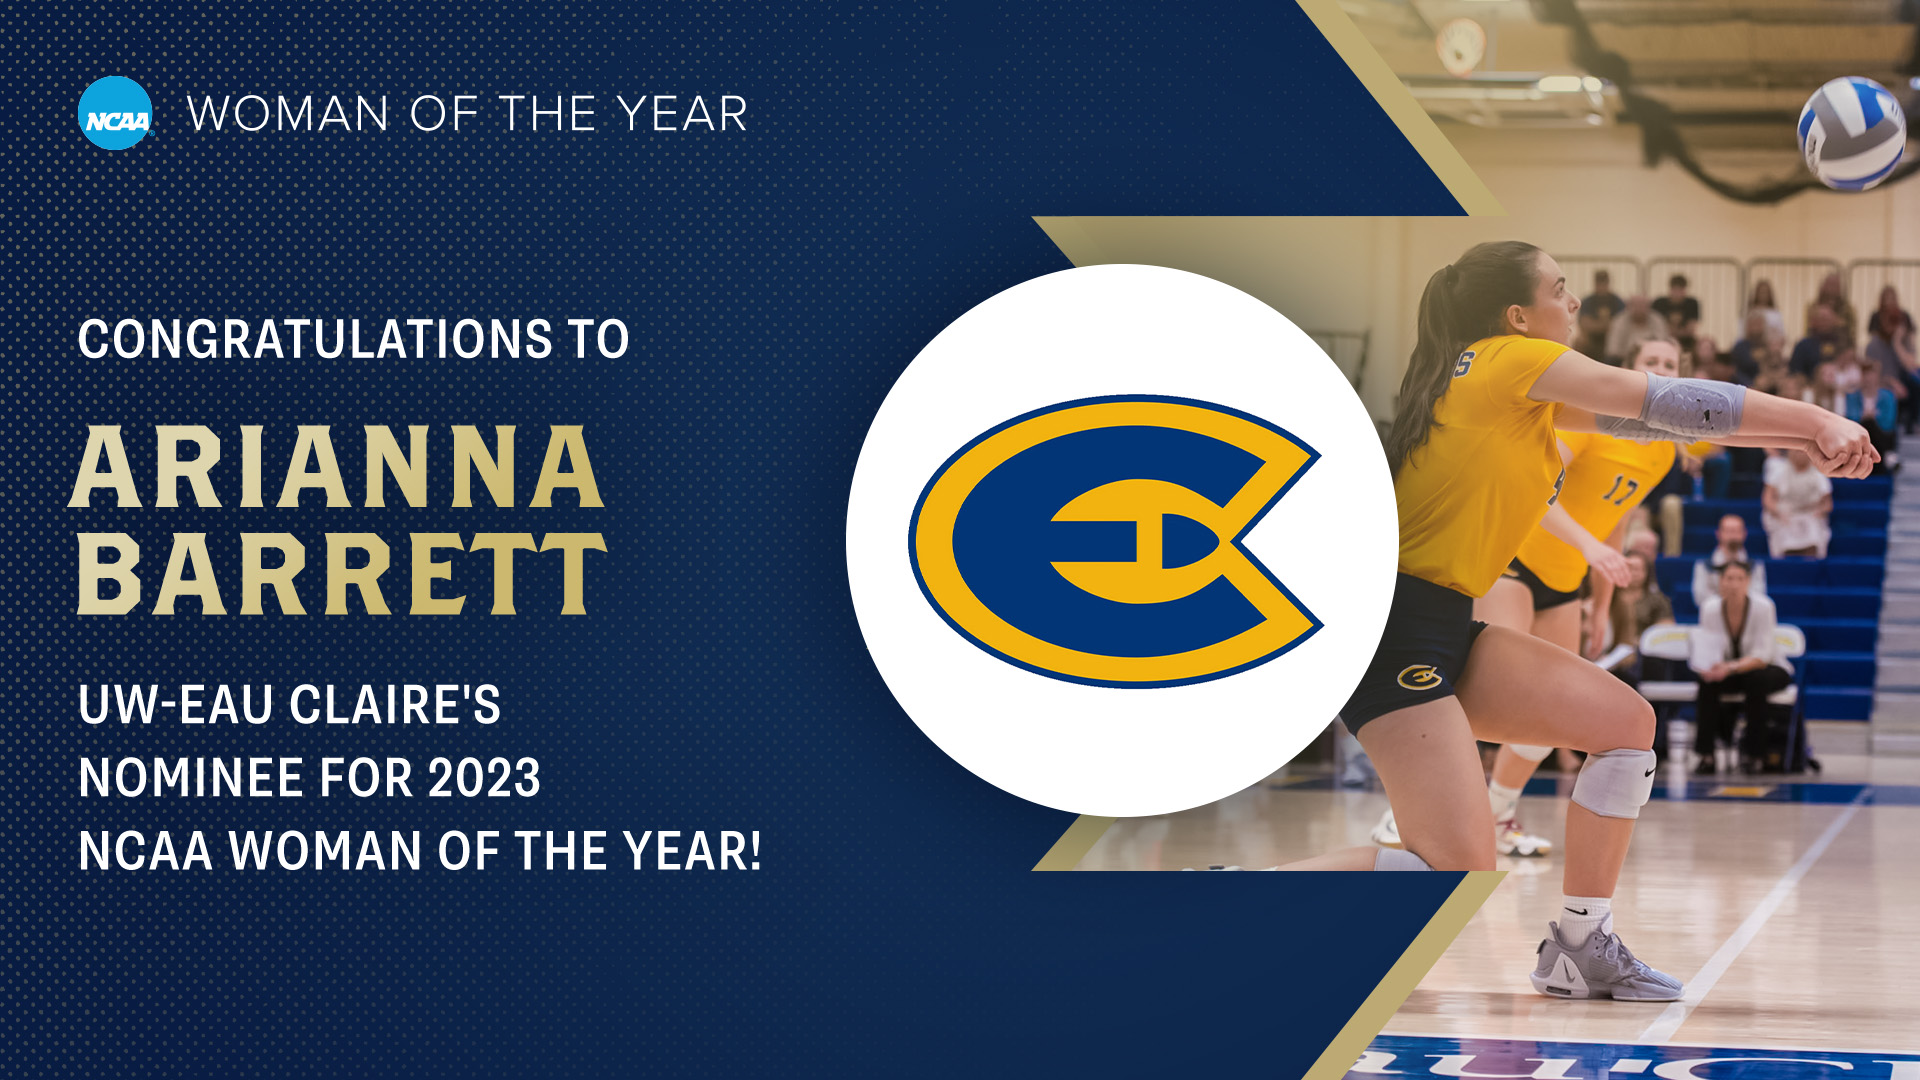 Volleyball's Arianna Barrett Nominated for NCAA Woman of the Year